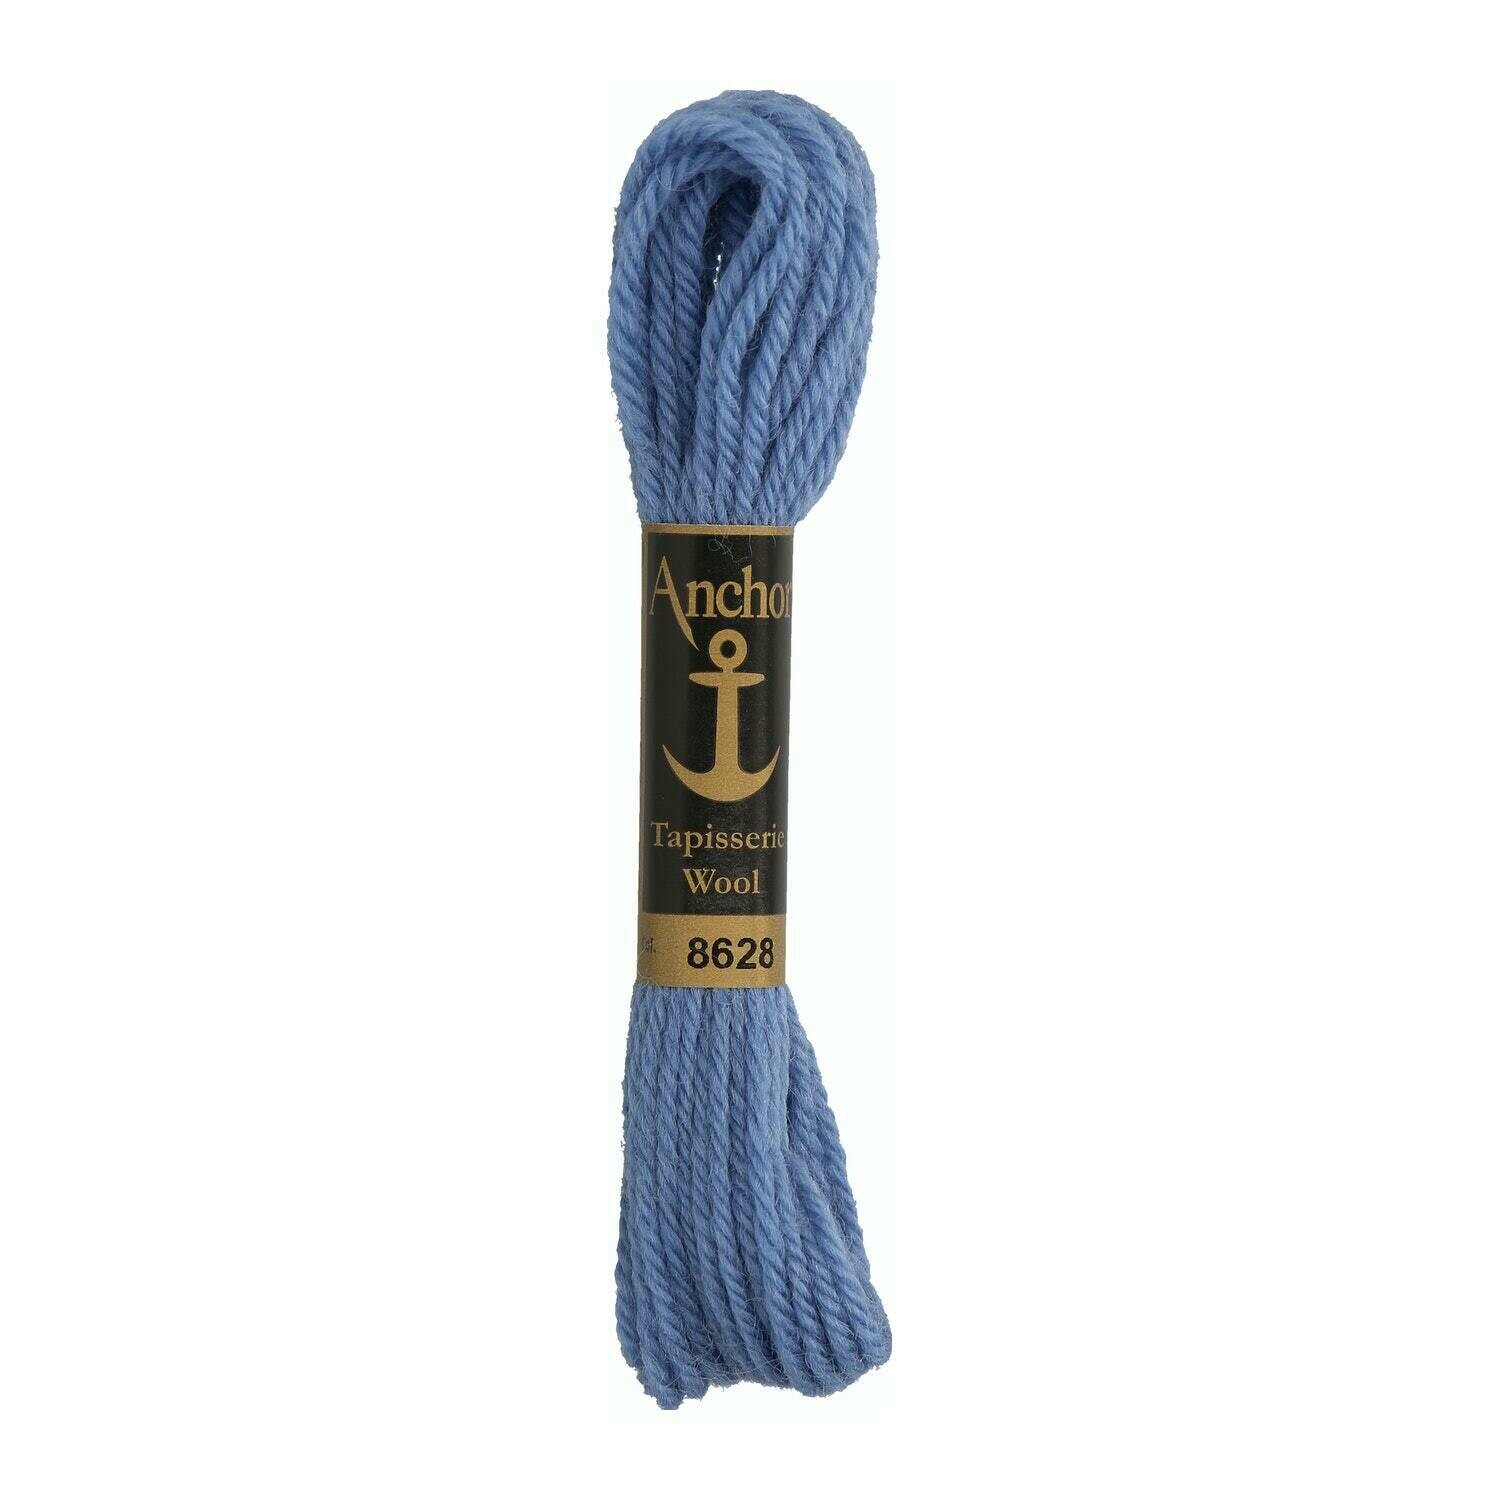 Anchor Tapisserie Wool #08628